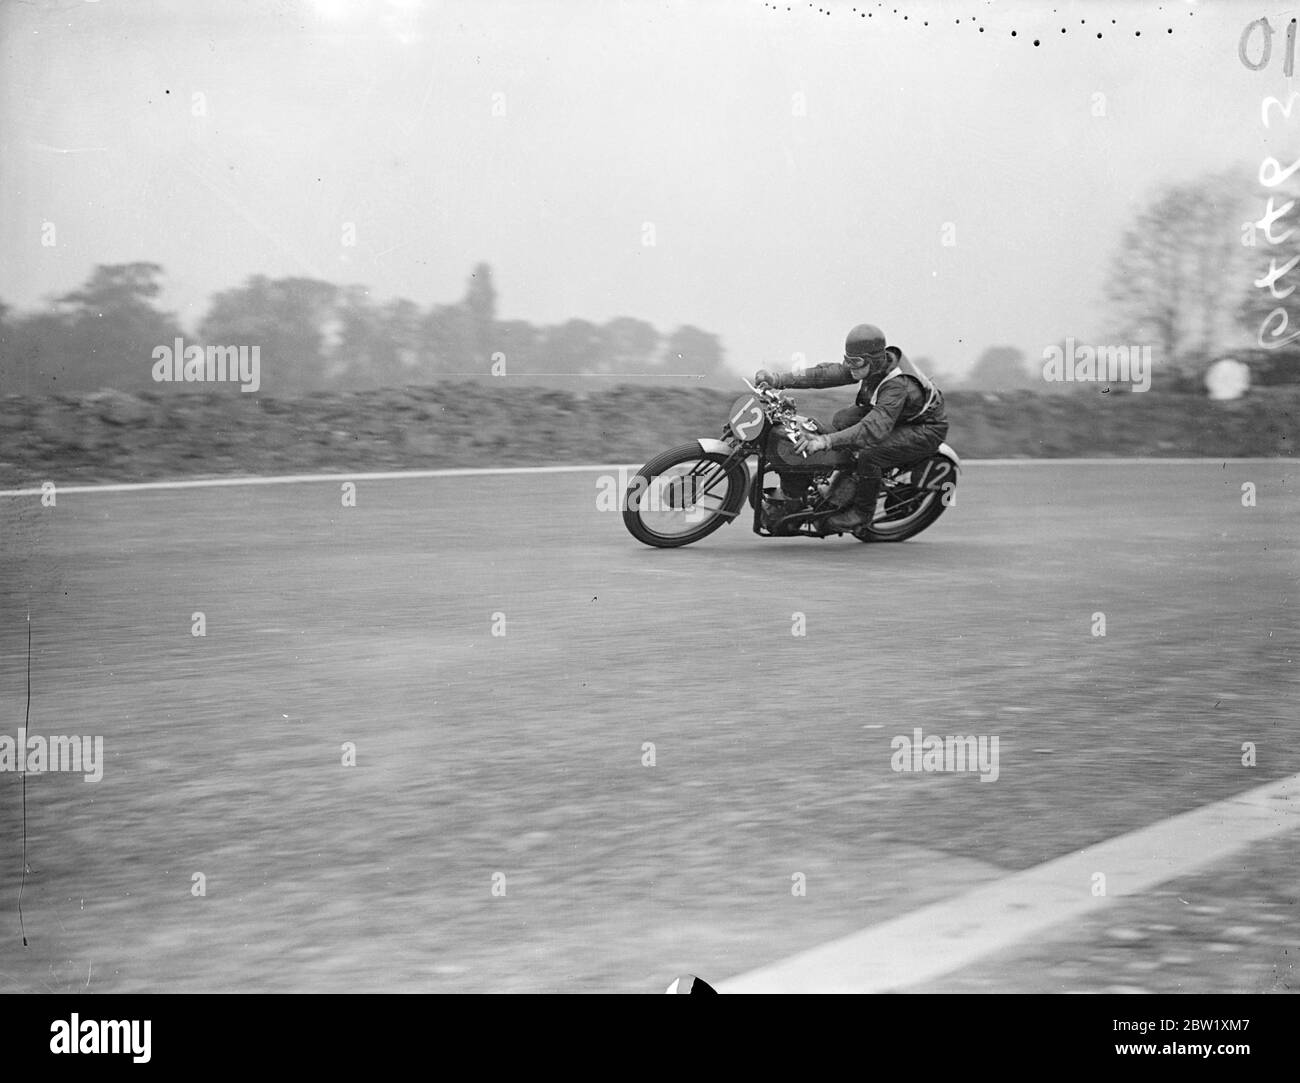 Cann wins Junior Coronation Grand Prix on Crystal Palace circuit. M. Cann (Norton) won the Junior Coronation Grand Prix motor-cycle event on the Crystal Palace road-racing circuit. His speed for the 60 miles course was 53.50 miles an hour. Photo shows: M. Cann rounding Stadium Bend on his Norton. 15 May 1937 Stock Photo